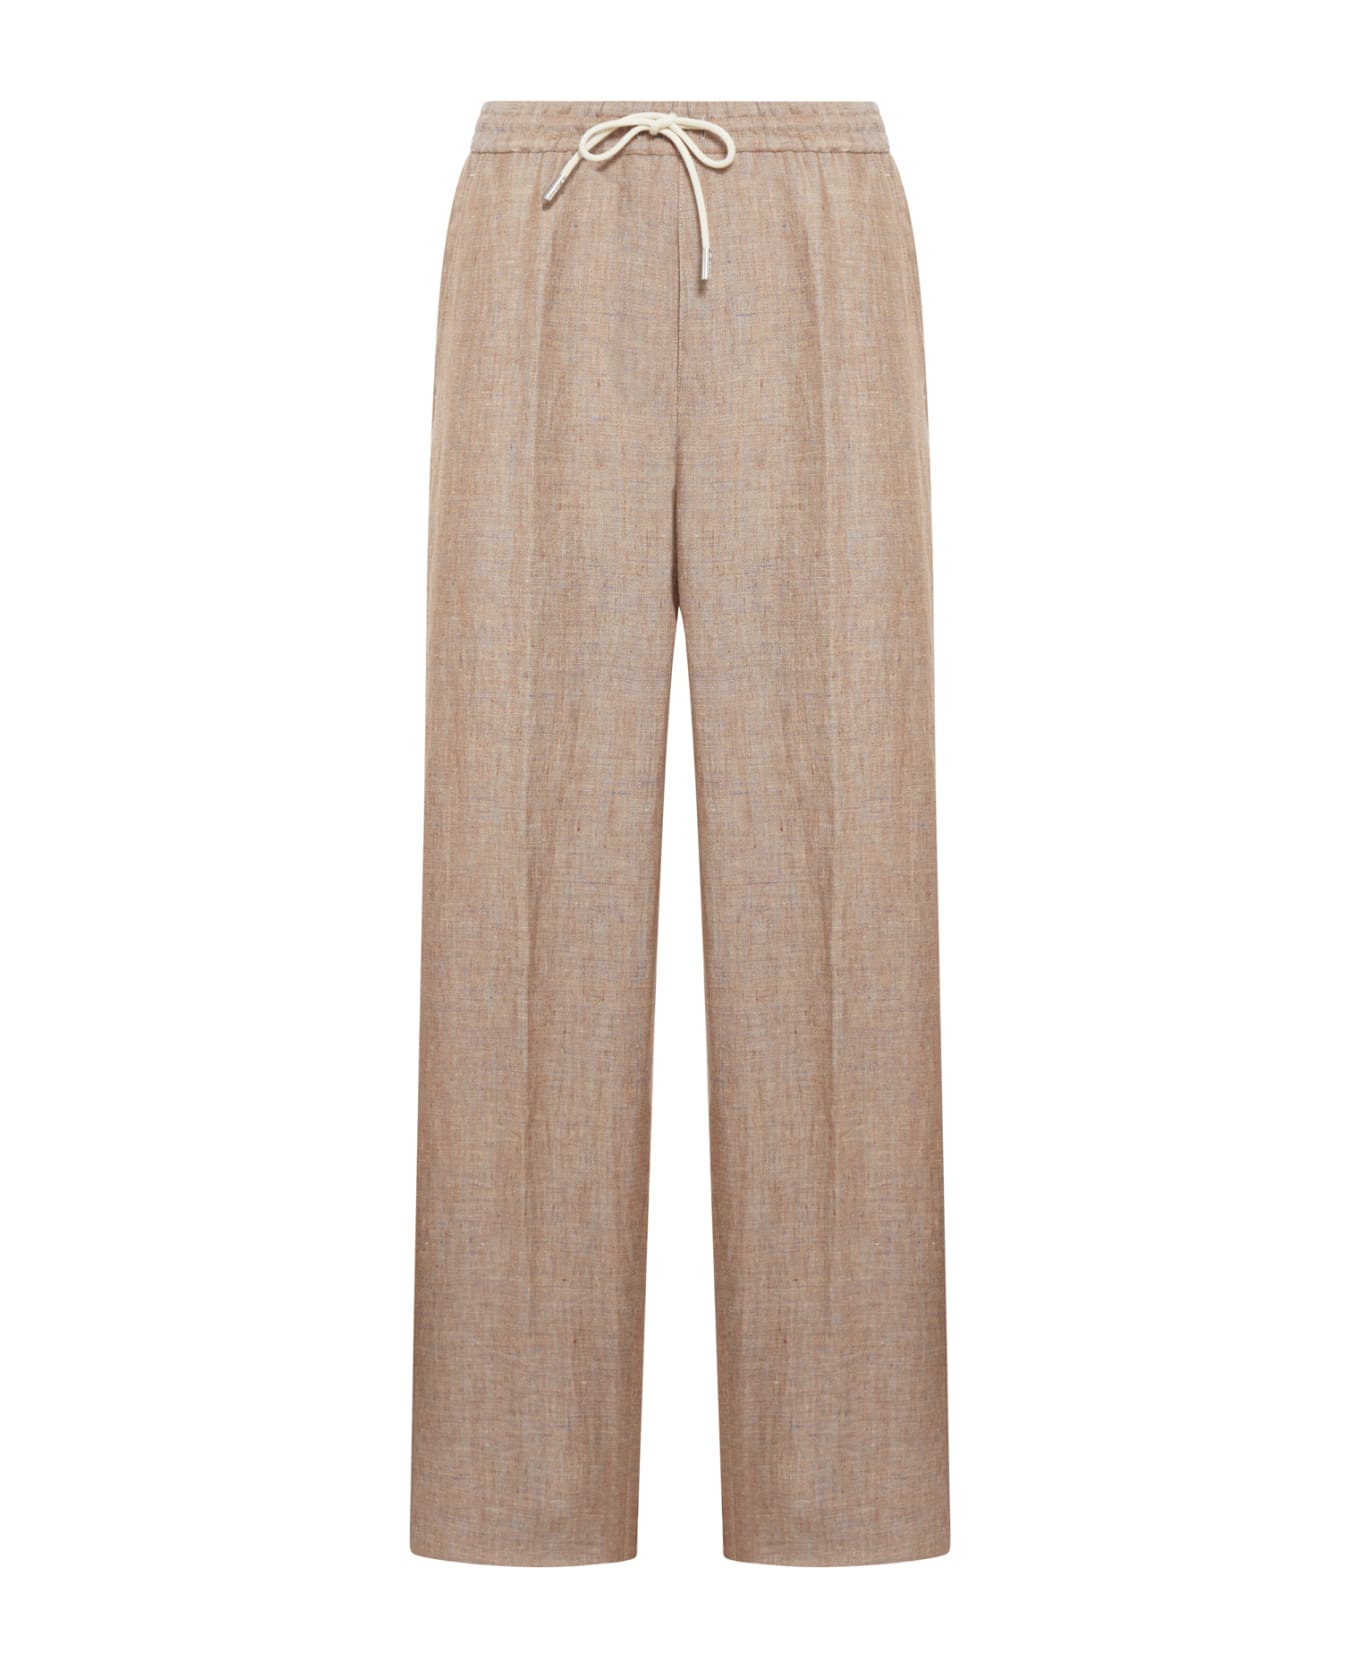 Etro Trousers W/ Coulisse - Beige